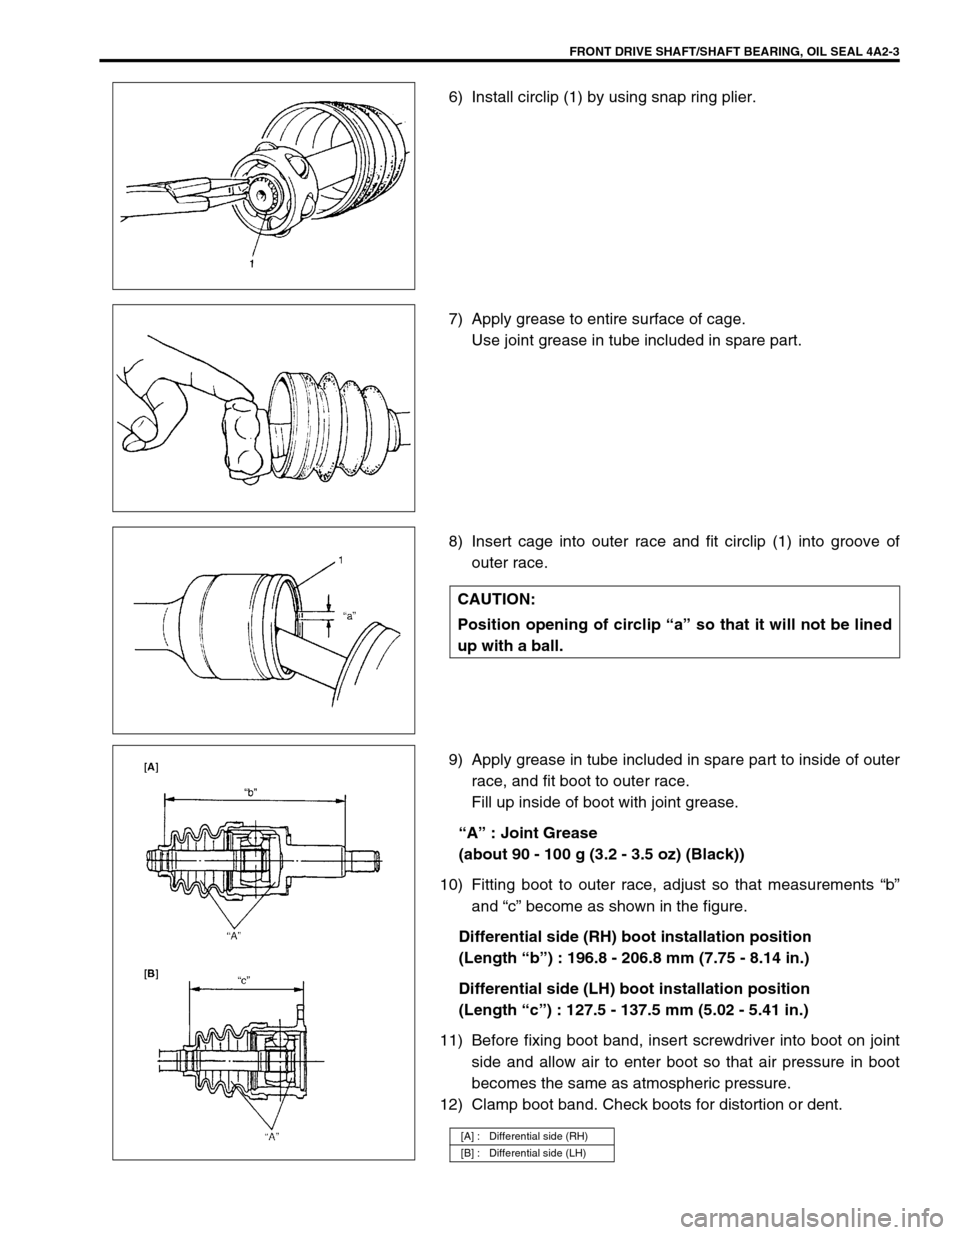 SUZUKI GRAND VITARA 1999 2.G Owners Manual FRONT DRIVE SHAFT/SHAFT BEARING, OIL SEAL 4A2-3
6) Install circlip (1) by using snap ring plier.
7) Apply grease to entire surface of cage. 
Use joint grease in tube included in spare part.
8) Insert 